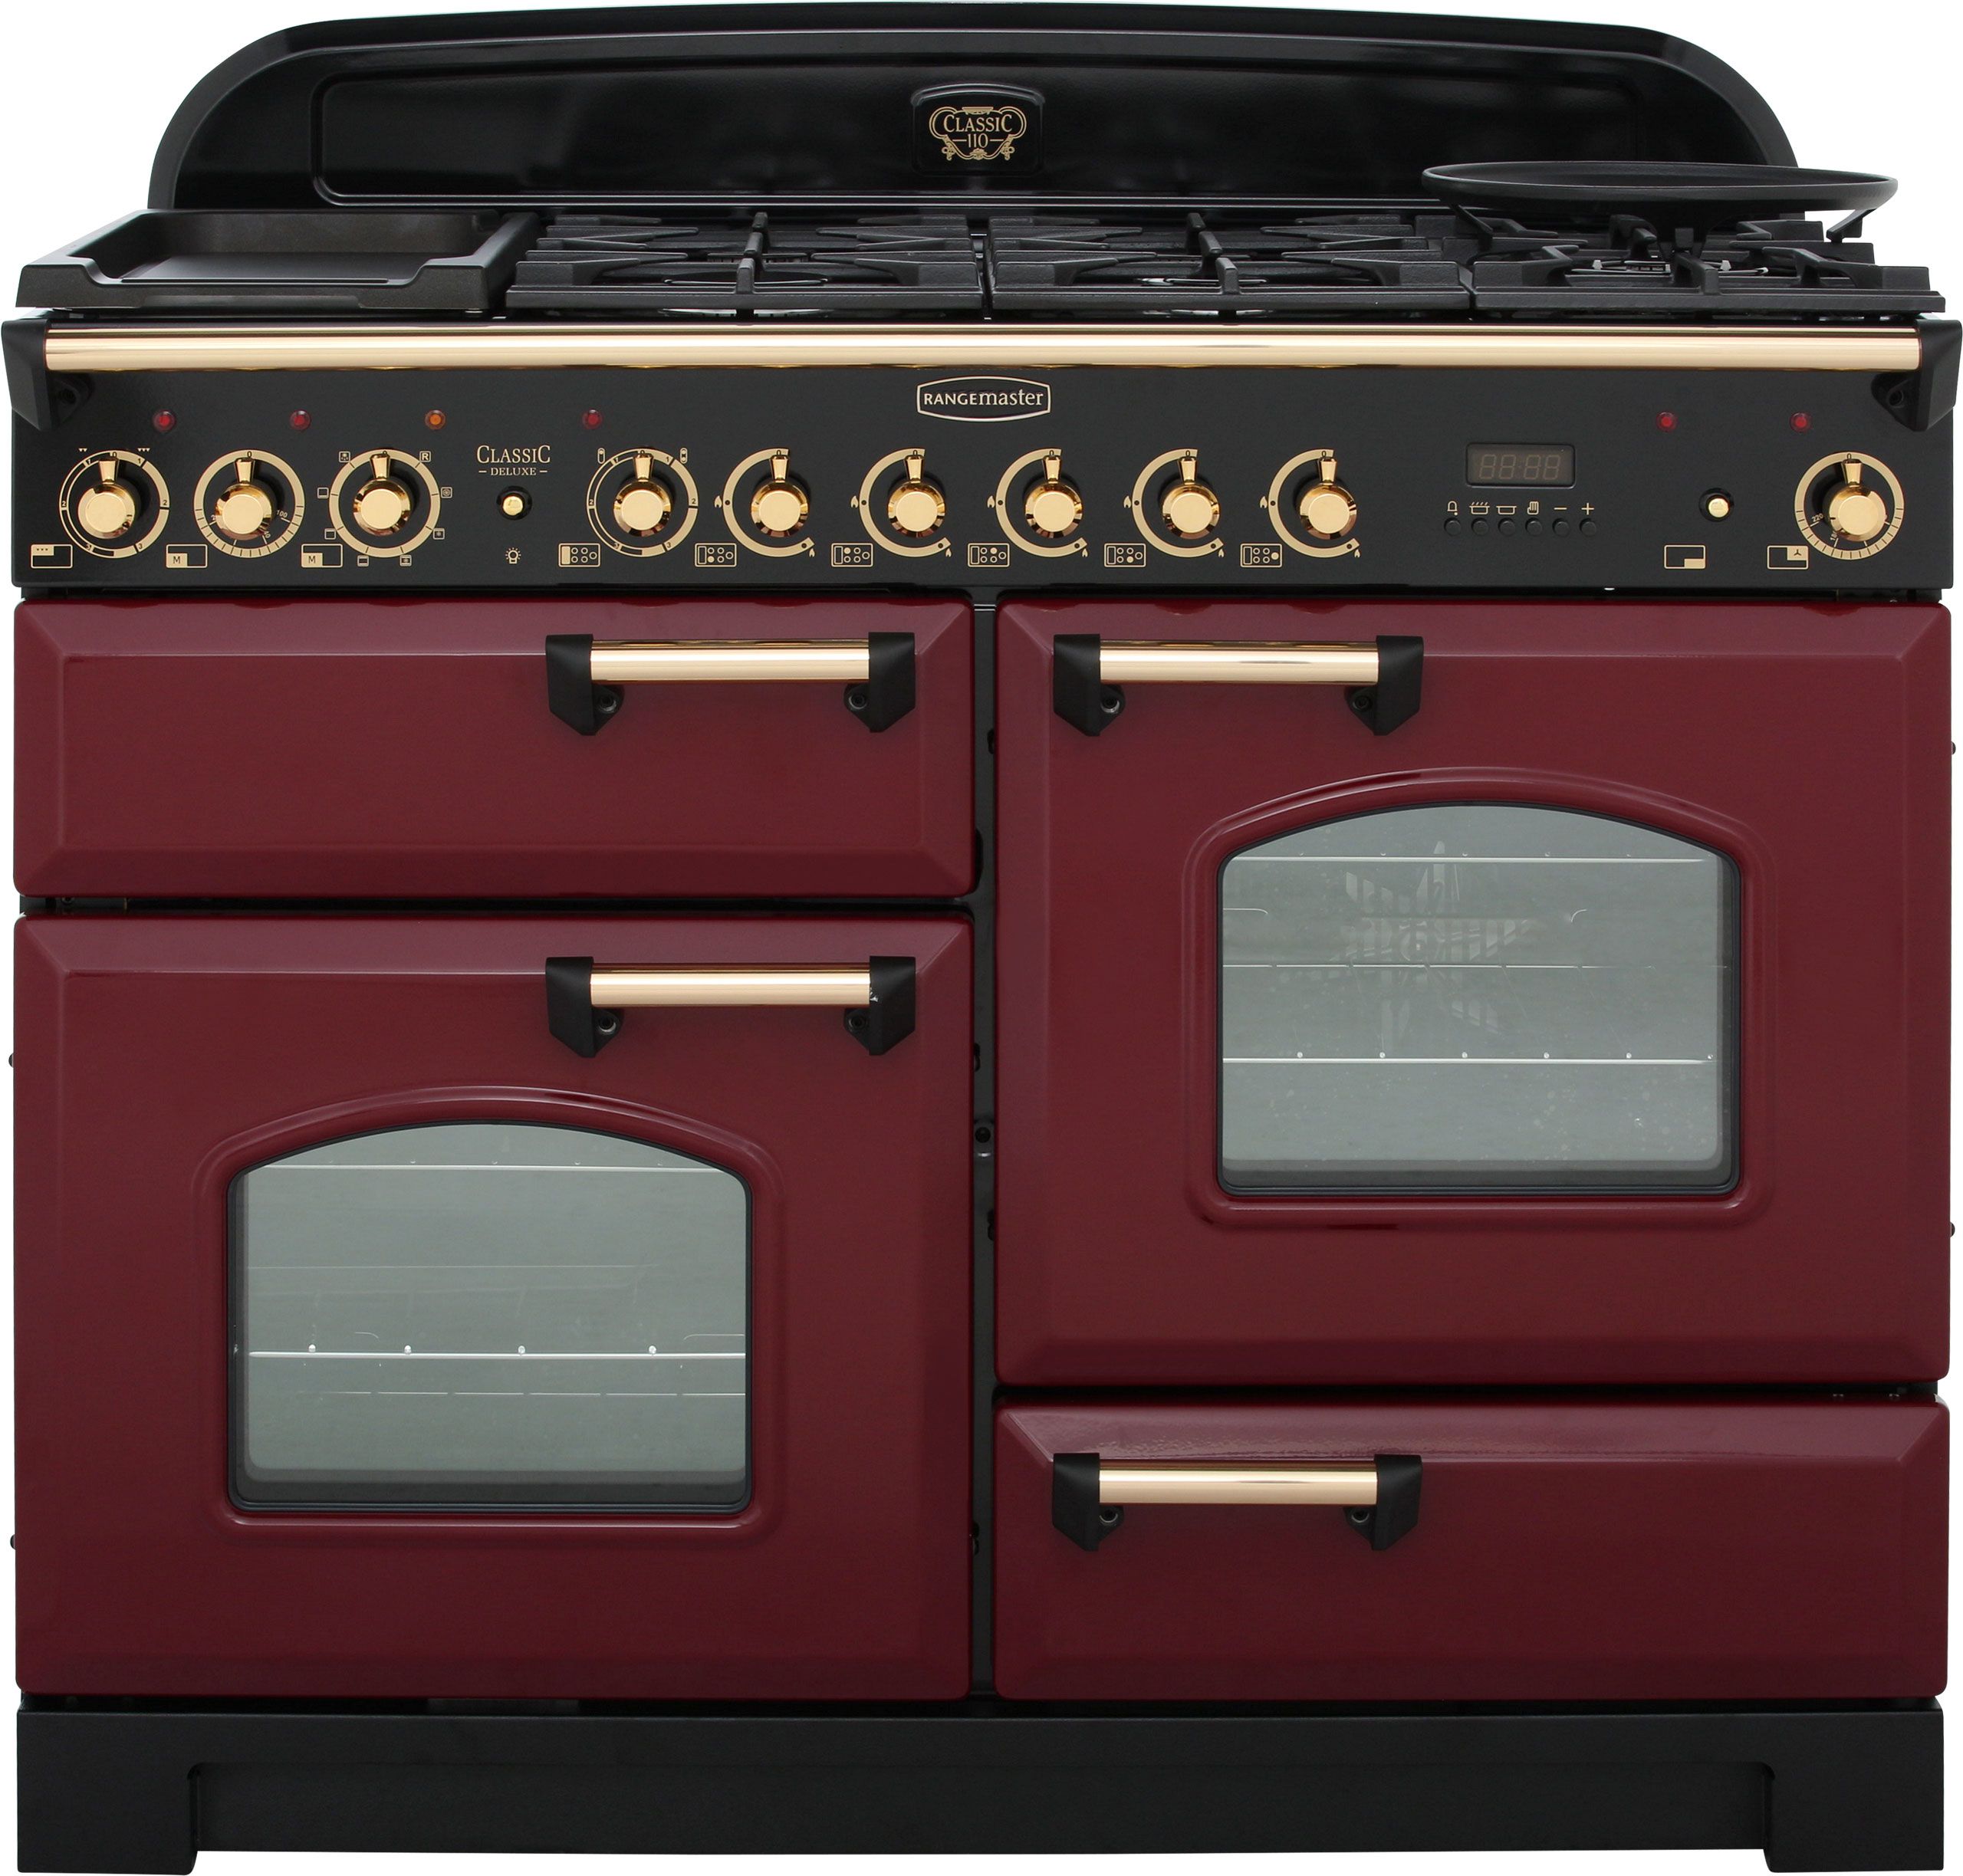 Rangemaster Classic Deluxe CDL110DFFCY/B 110cm Dual Fuel Range Cooker - Cranberry / Brass - A/A Rated, Red